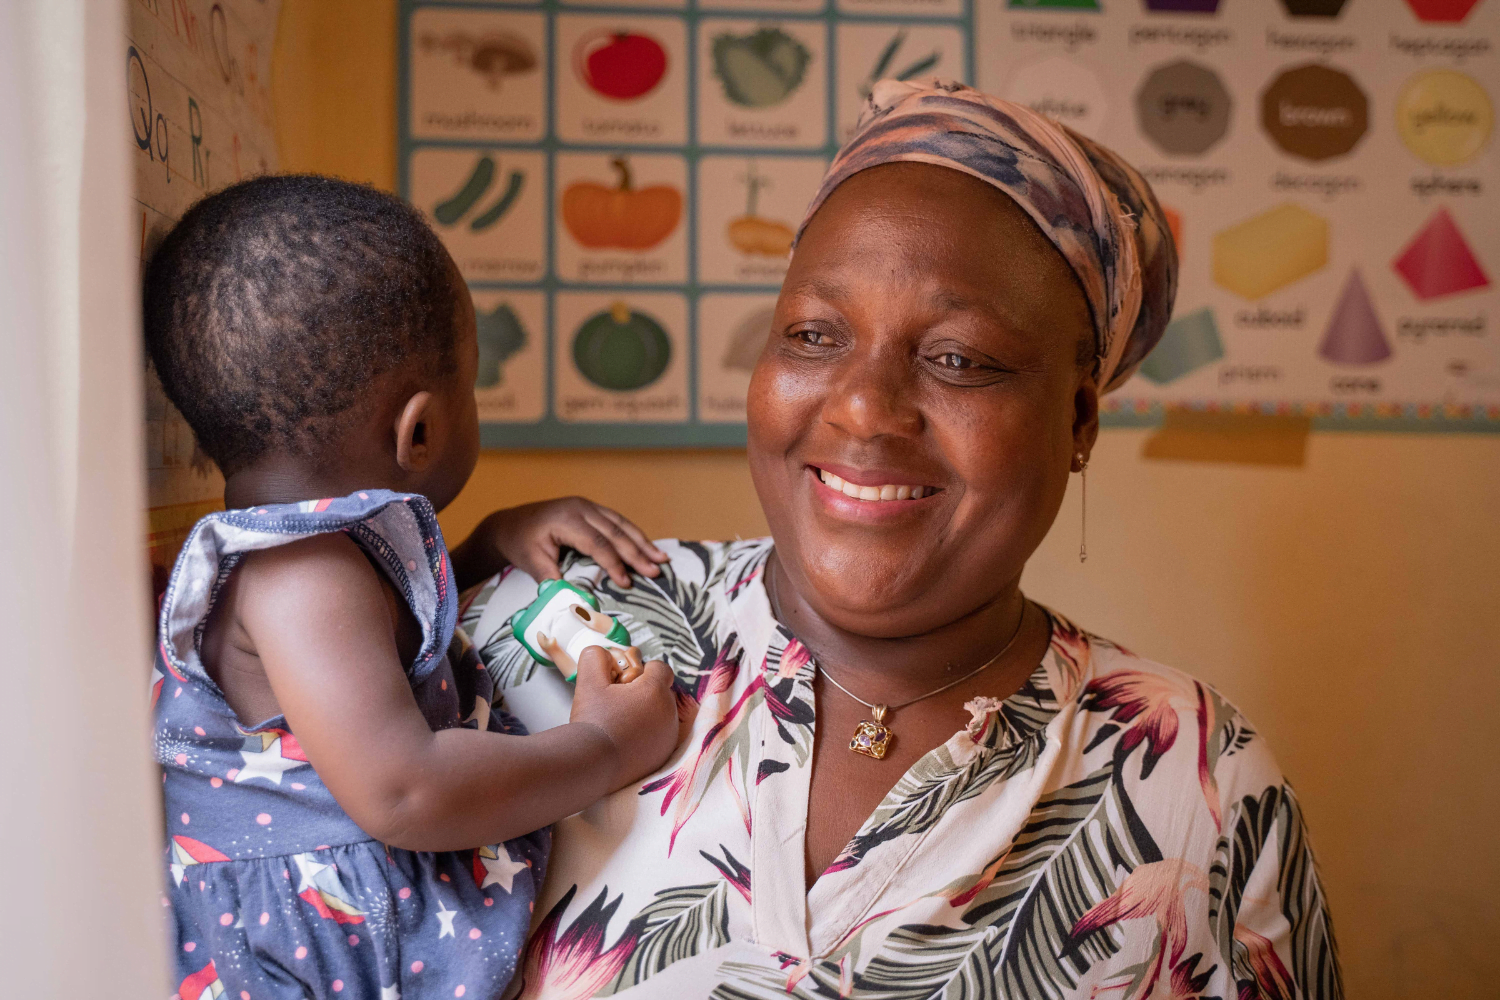 Jenifer Moyo, founder of the Tree of Life crèche, and HerVenture user holds a child at her creche